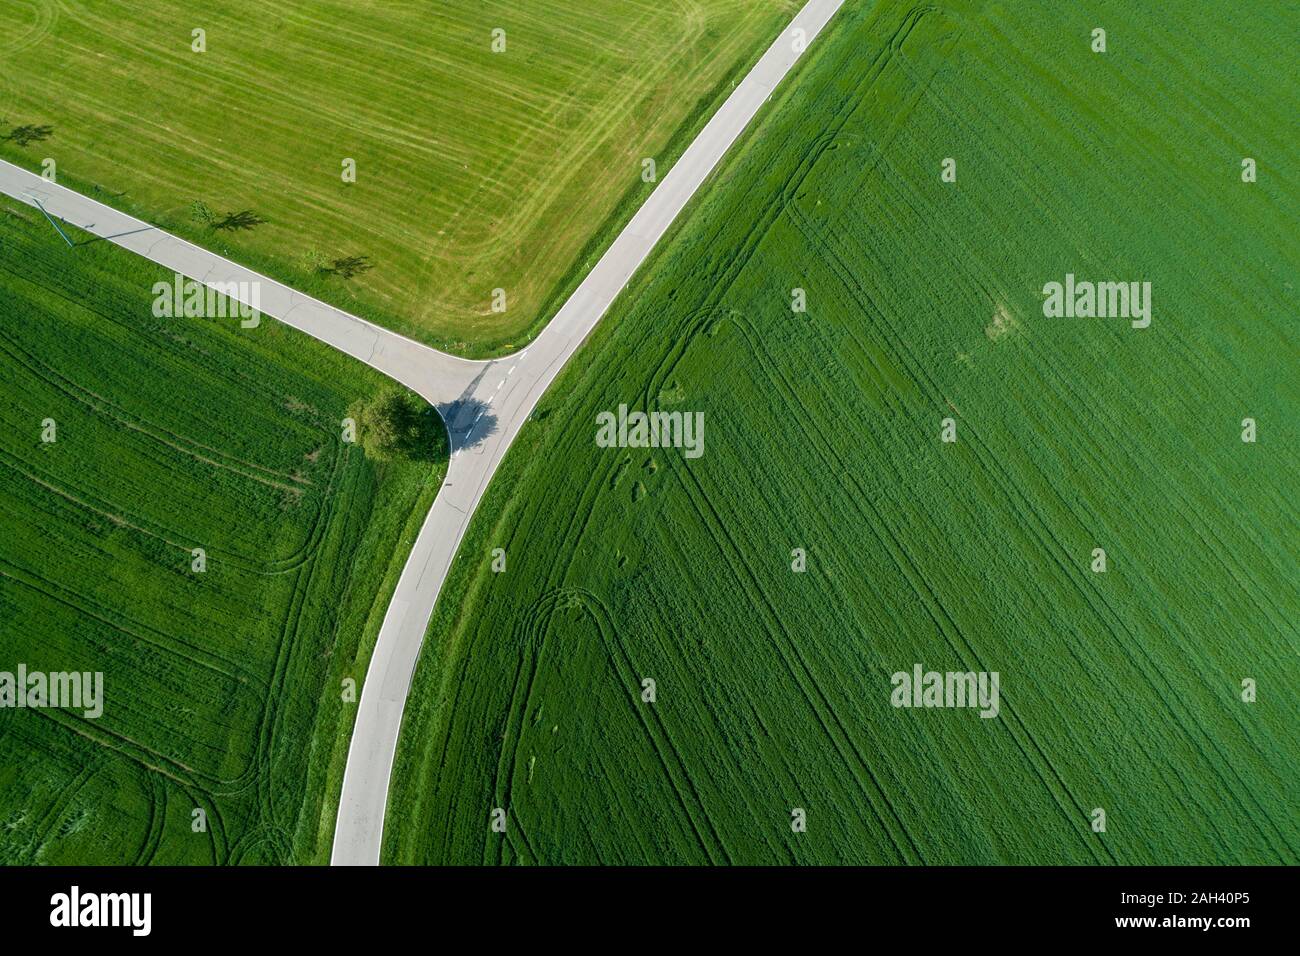 Germany, Bavaria, Aerial view of country roads cutting through green countryside fields in spring Stock Photo